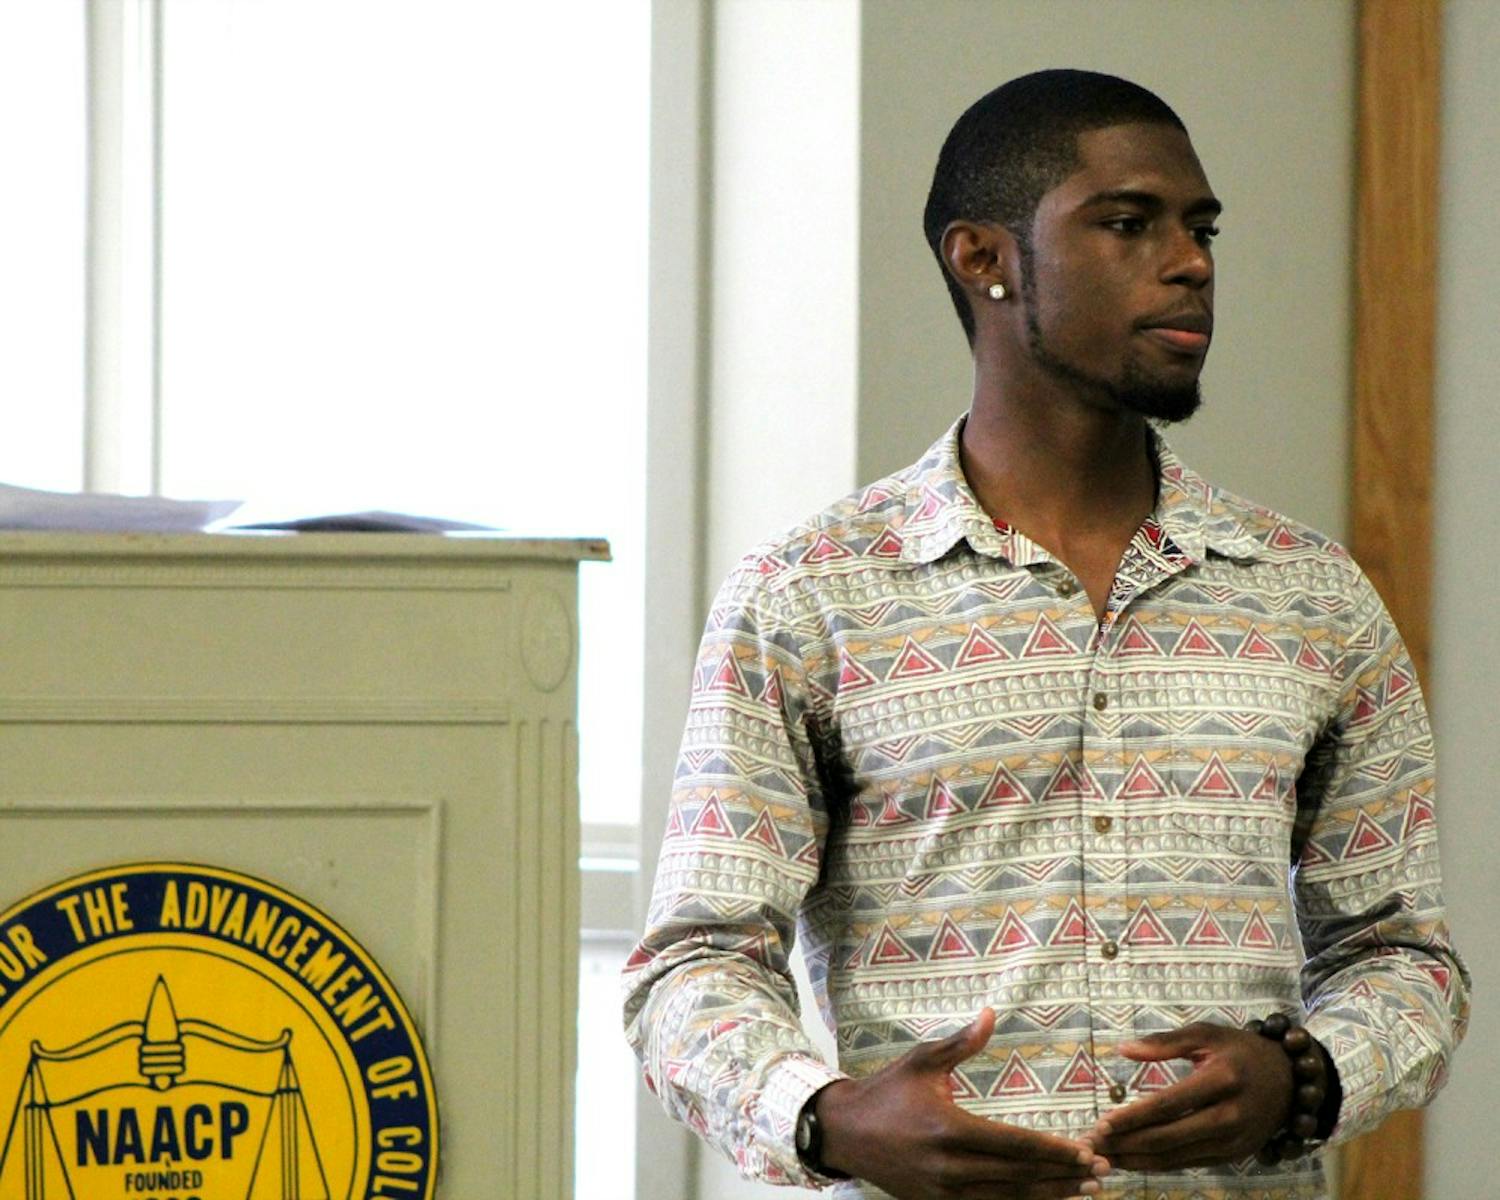 UNC Sophomore Madrid Danner-Smith spoke at the first meeting of the Chapel Hill-Carrboro NAACP Youth Council on Oct. 25, 2015